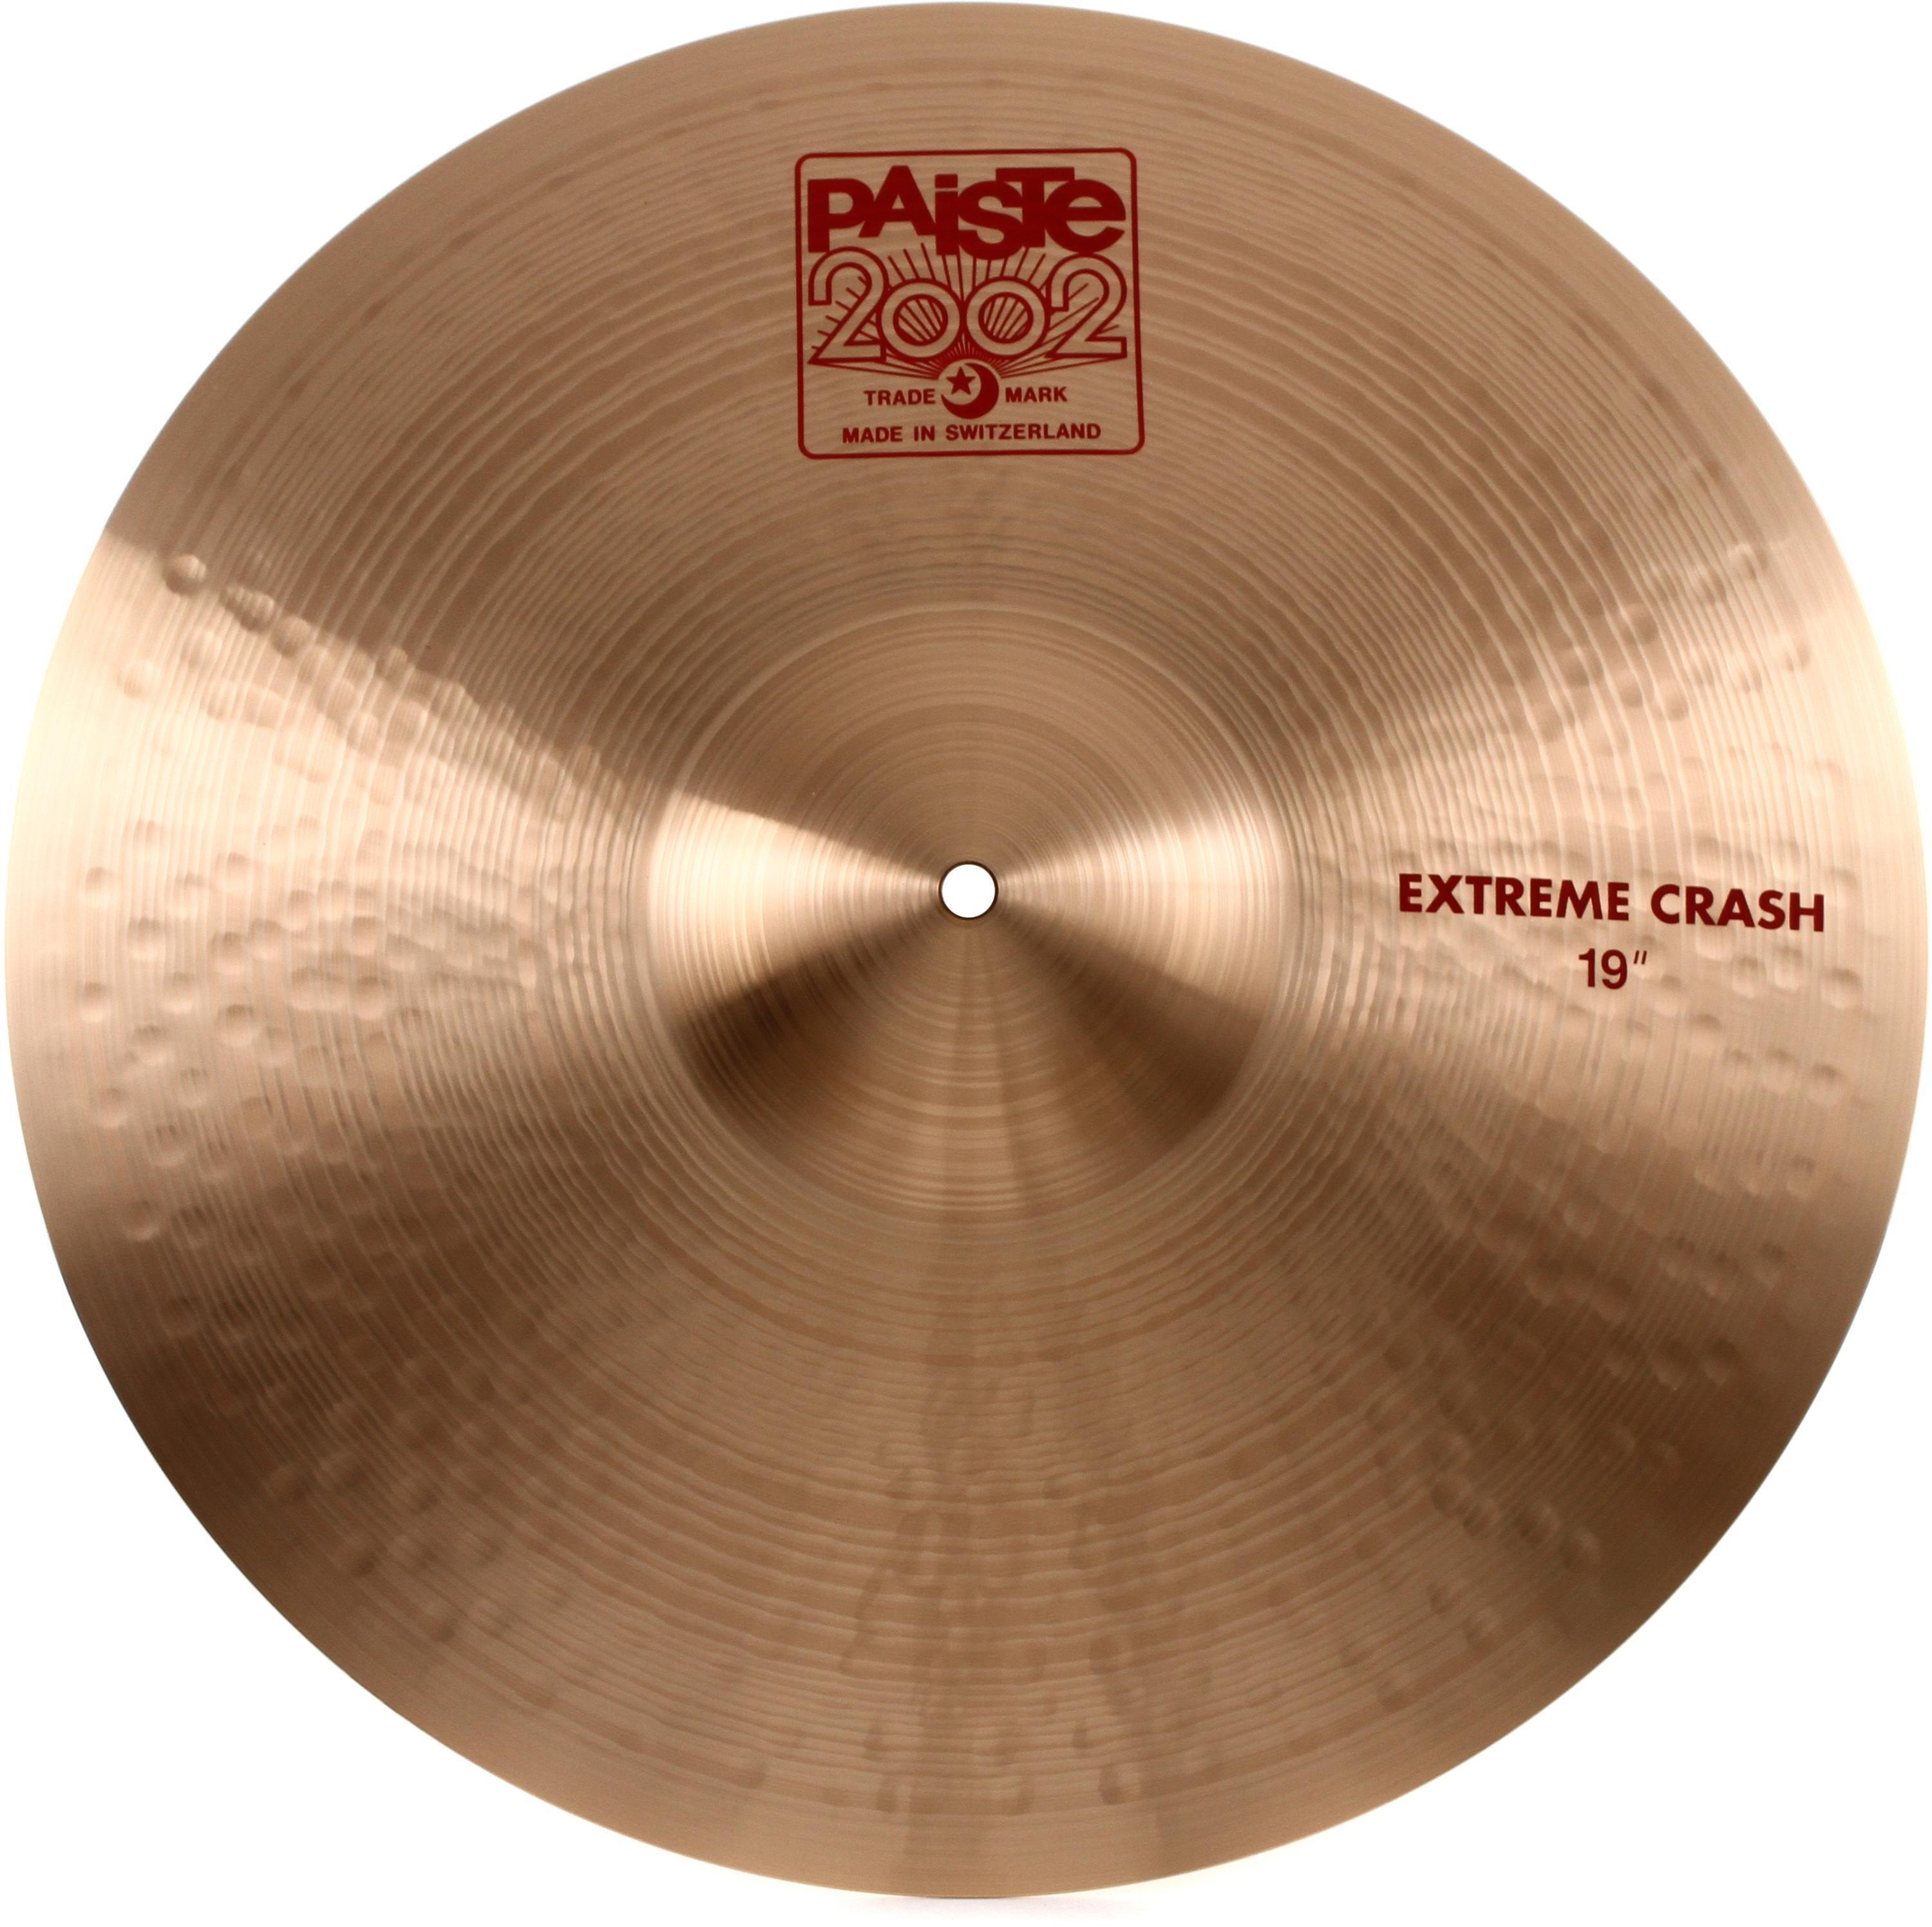 Paiste 19 inch 2002 Extreme Crash Cymbal | Sweetwater